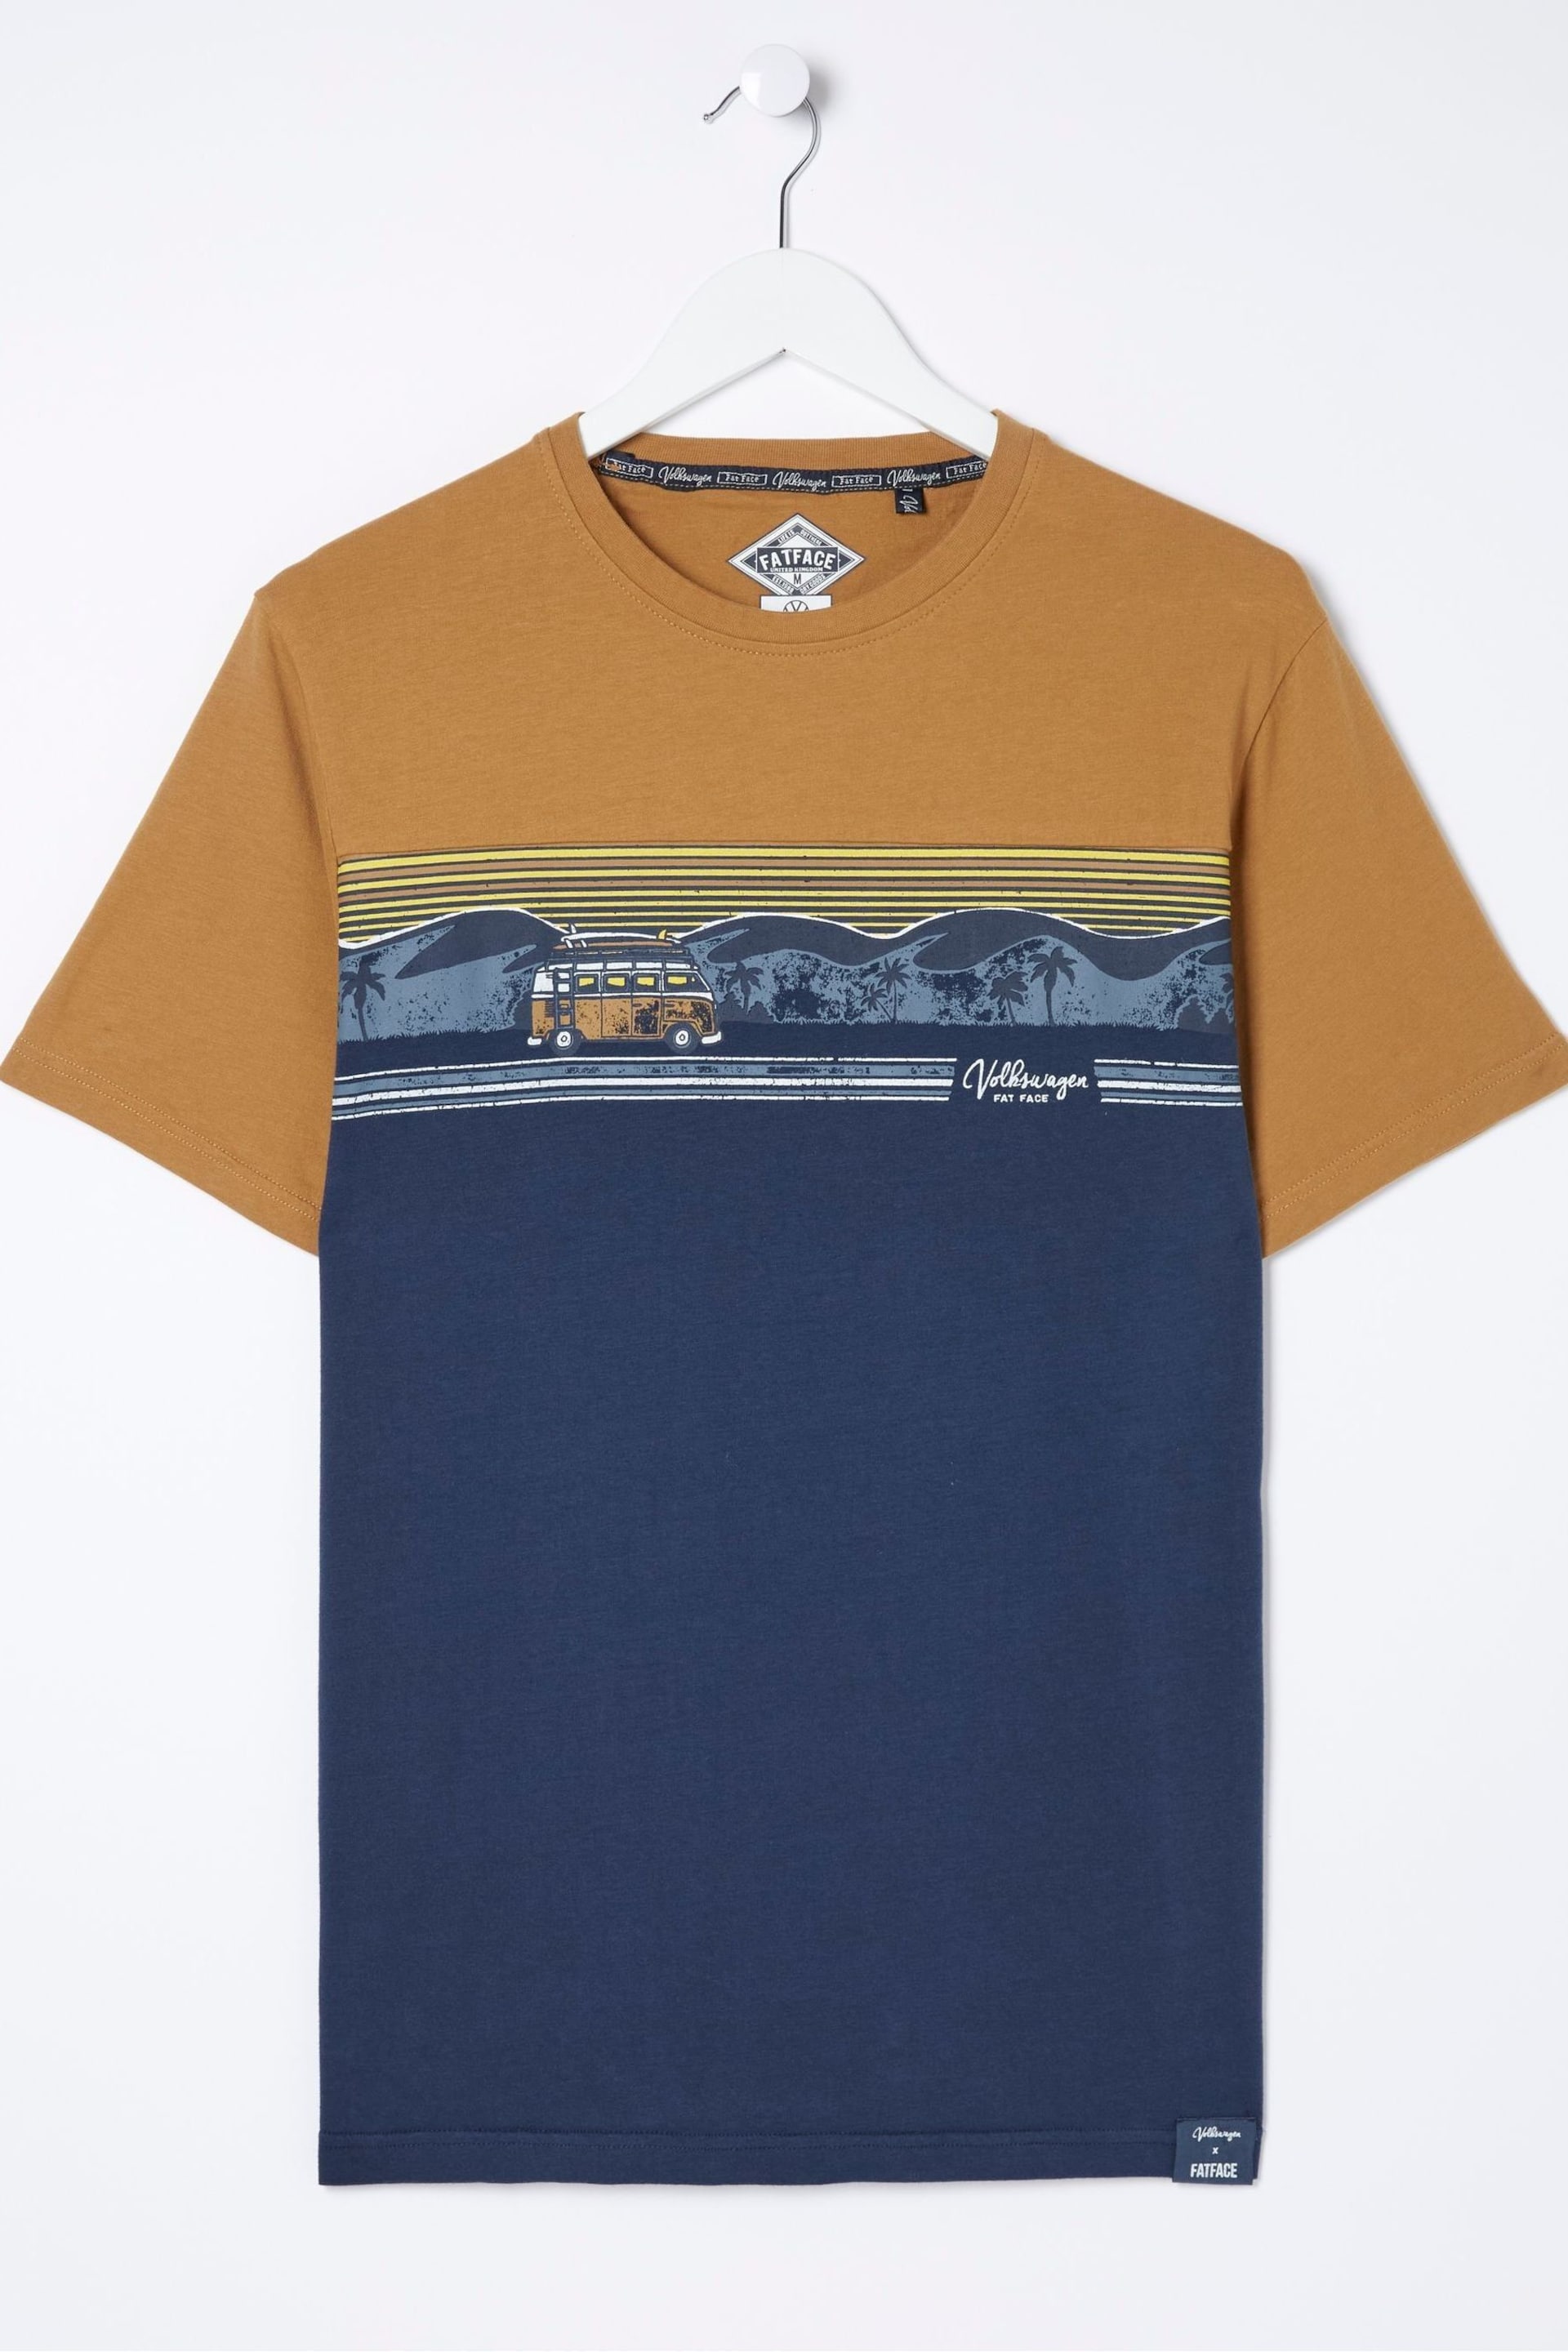 FatFace Natural VW Chest Stripe T-Shirt - Image 4 of 4